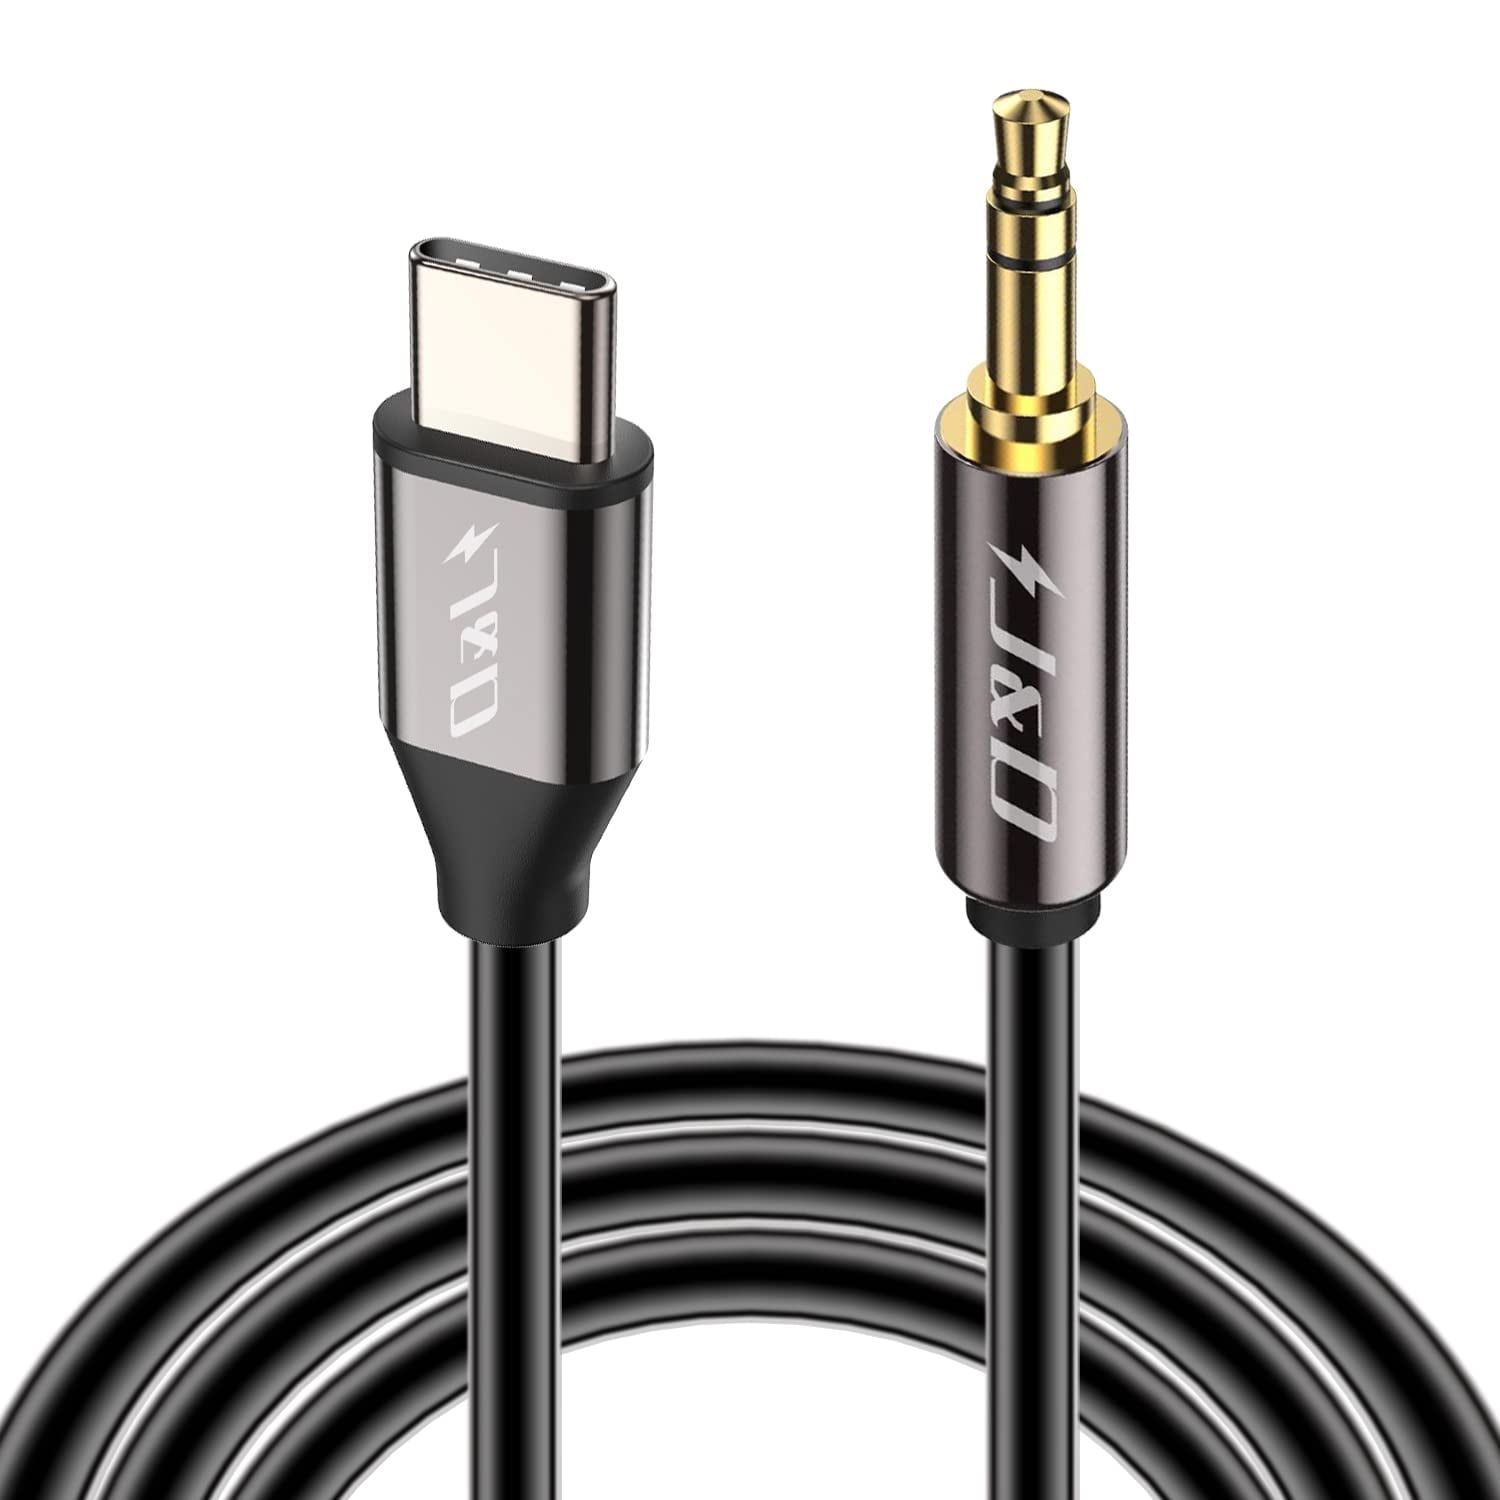 J&D USB C to 3.5mm 1/8 inch Aux Cable, USB Type C to Standard 3.5mm 1/8  inch TRS Male Car/Home Stereos Audio Cable